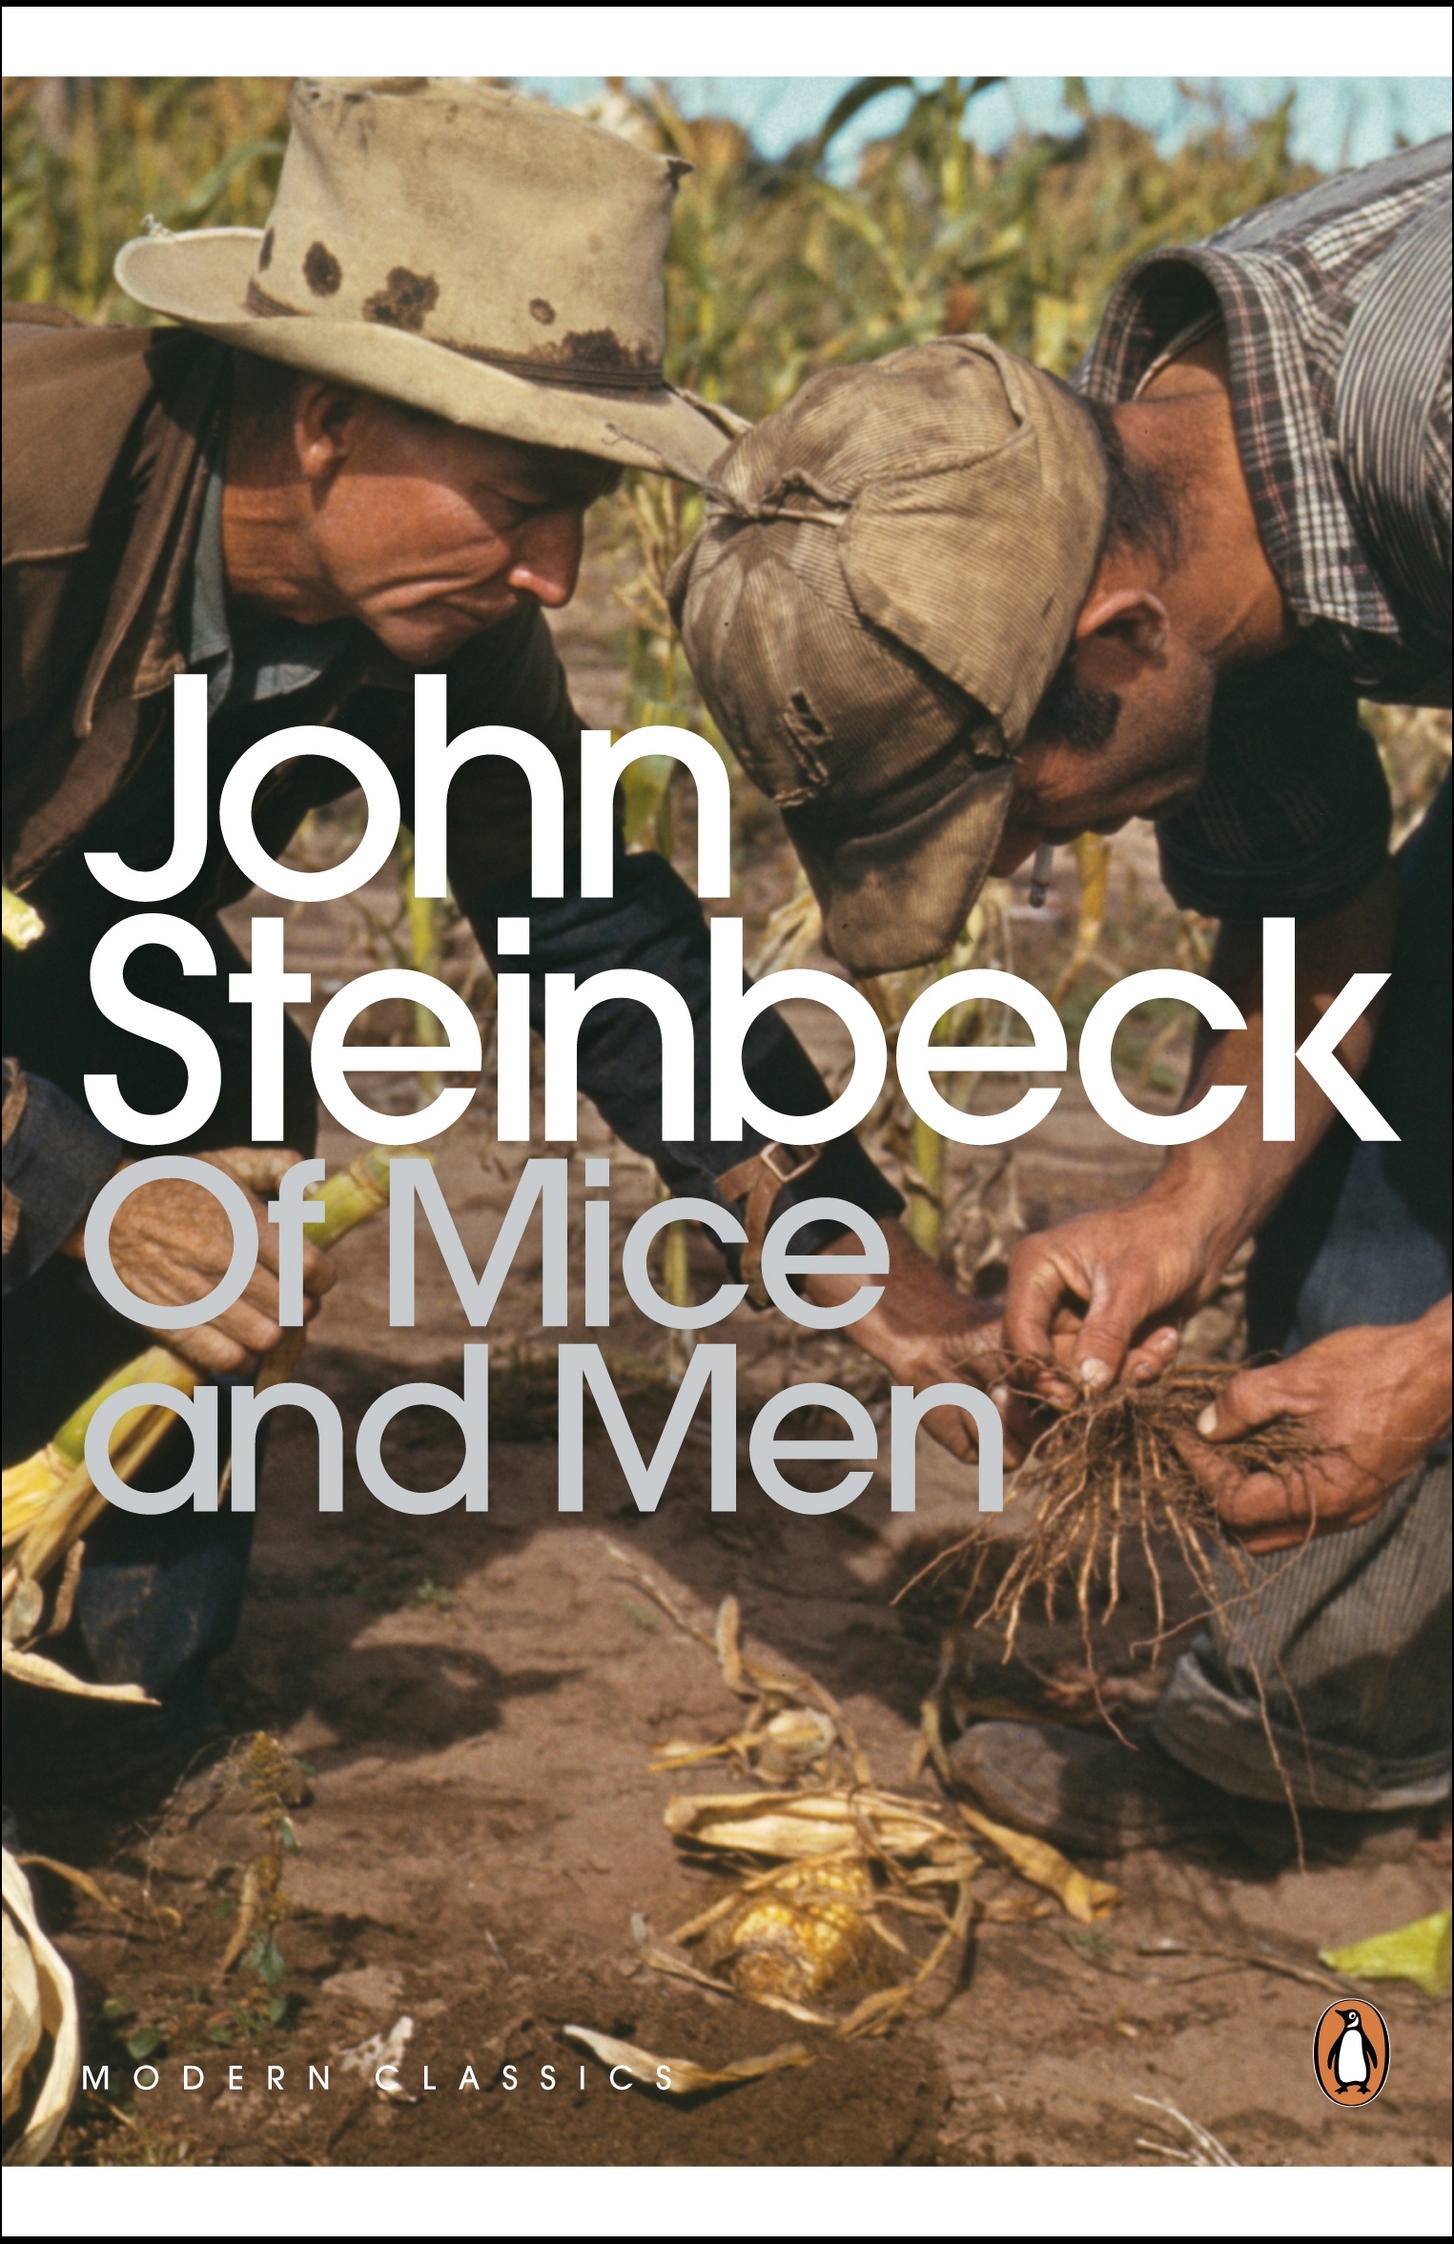 Of mice and men by john steinbeck review   thoughtco